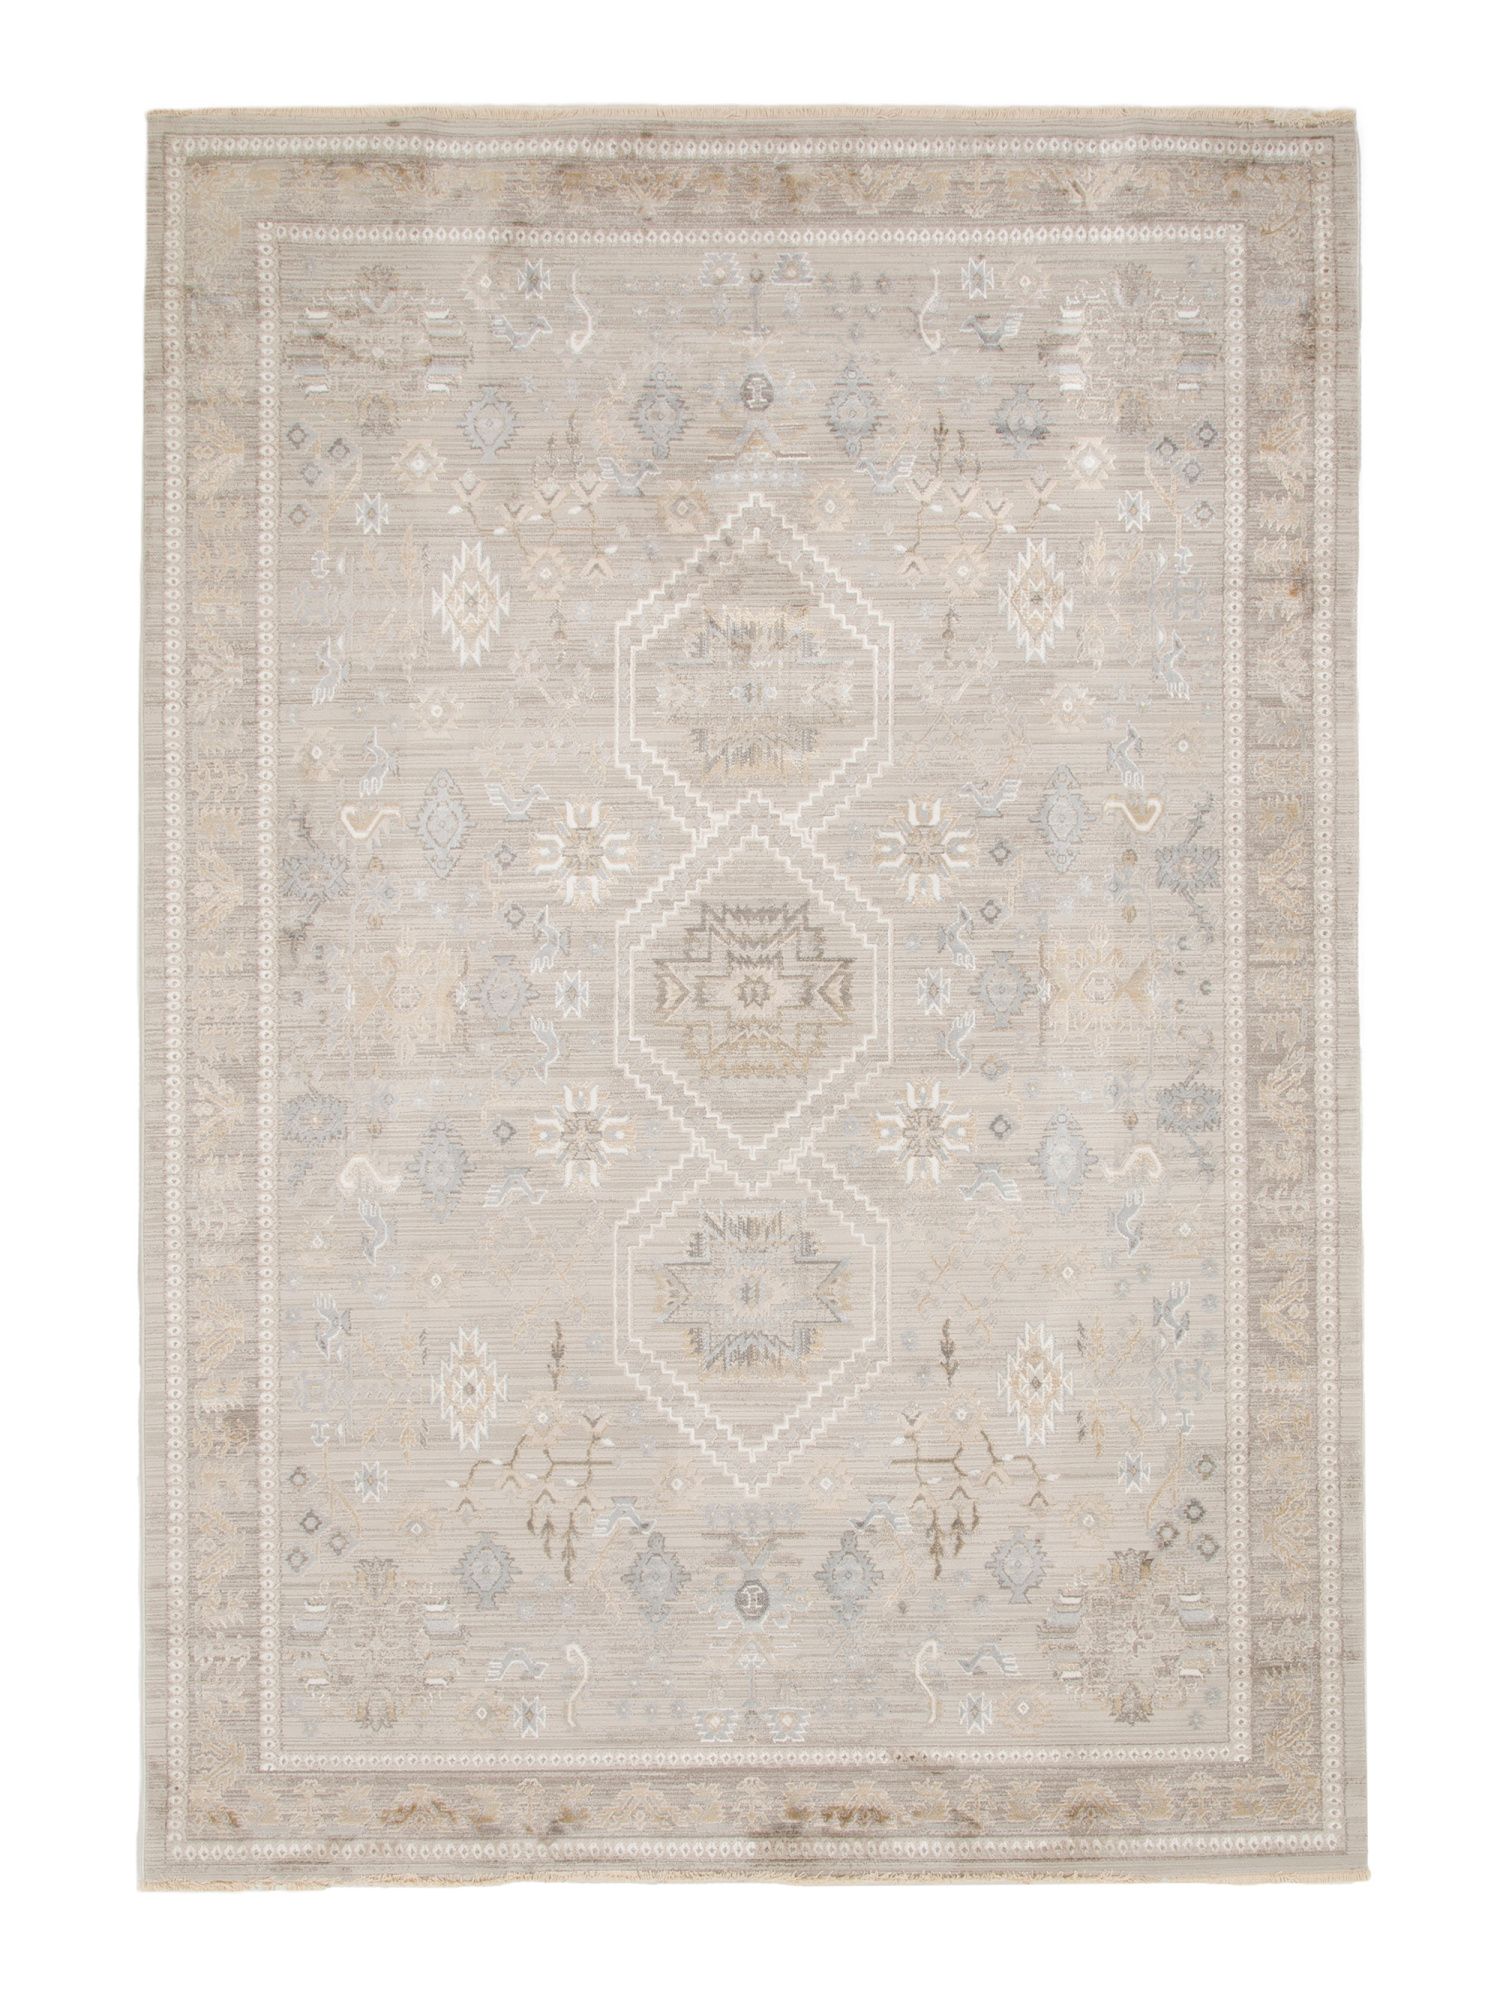 Made In Egypt Vintage Look Area Rug | TJ Maxx